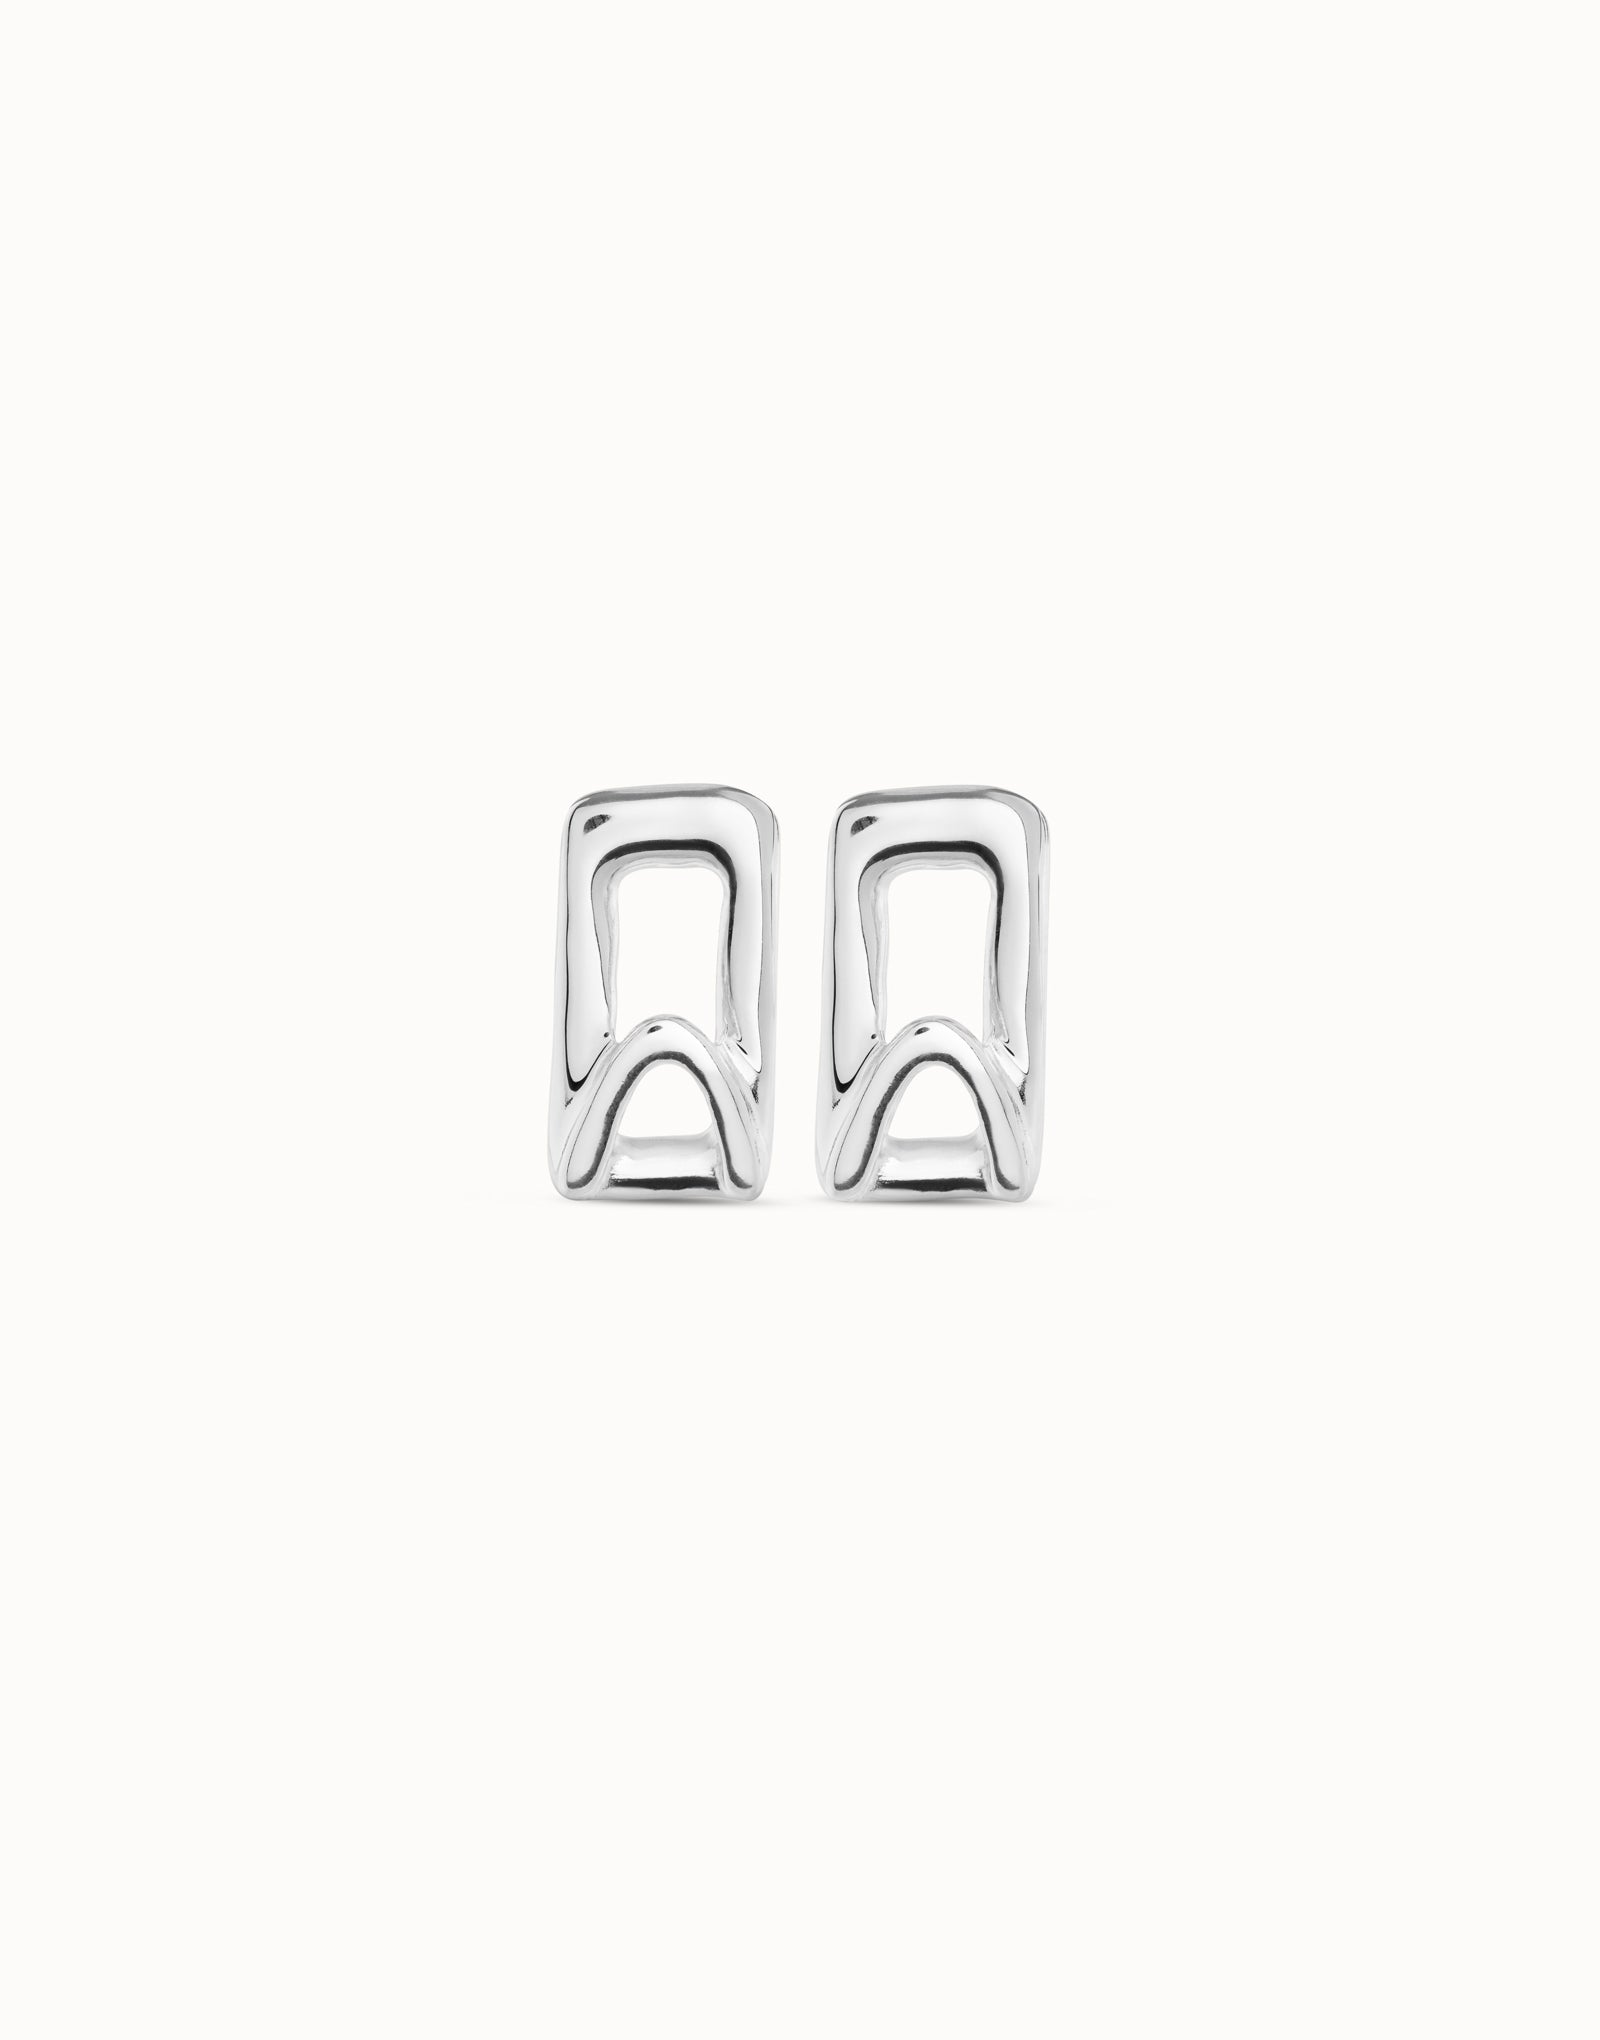 Stand out earrings | Uno de 50 | Luby 